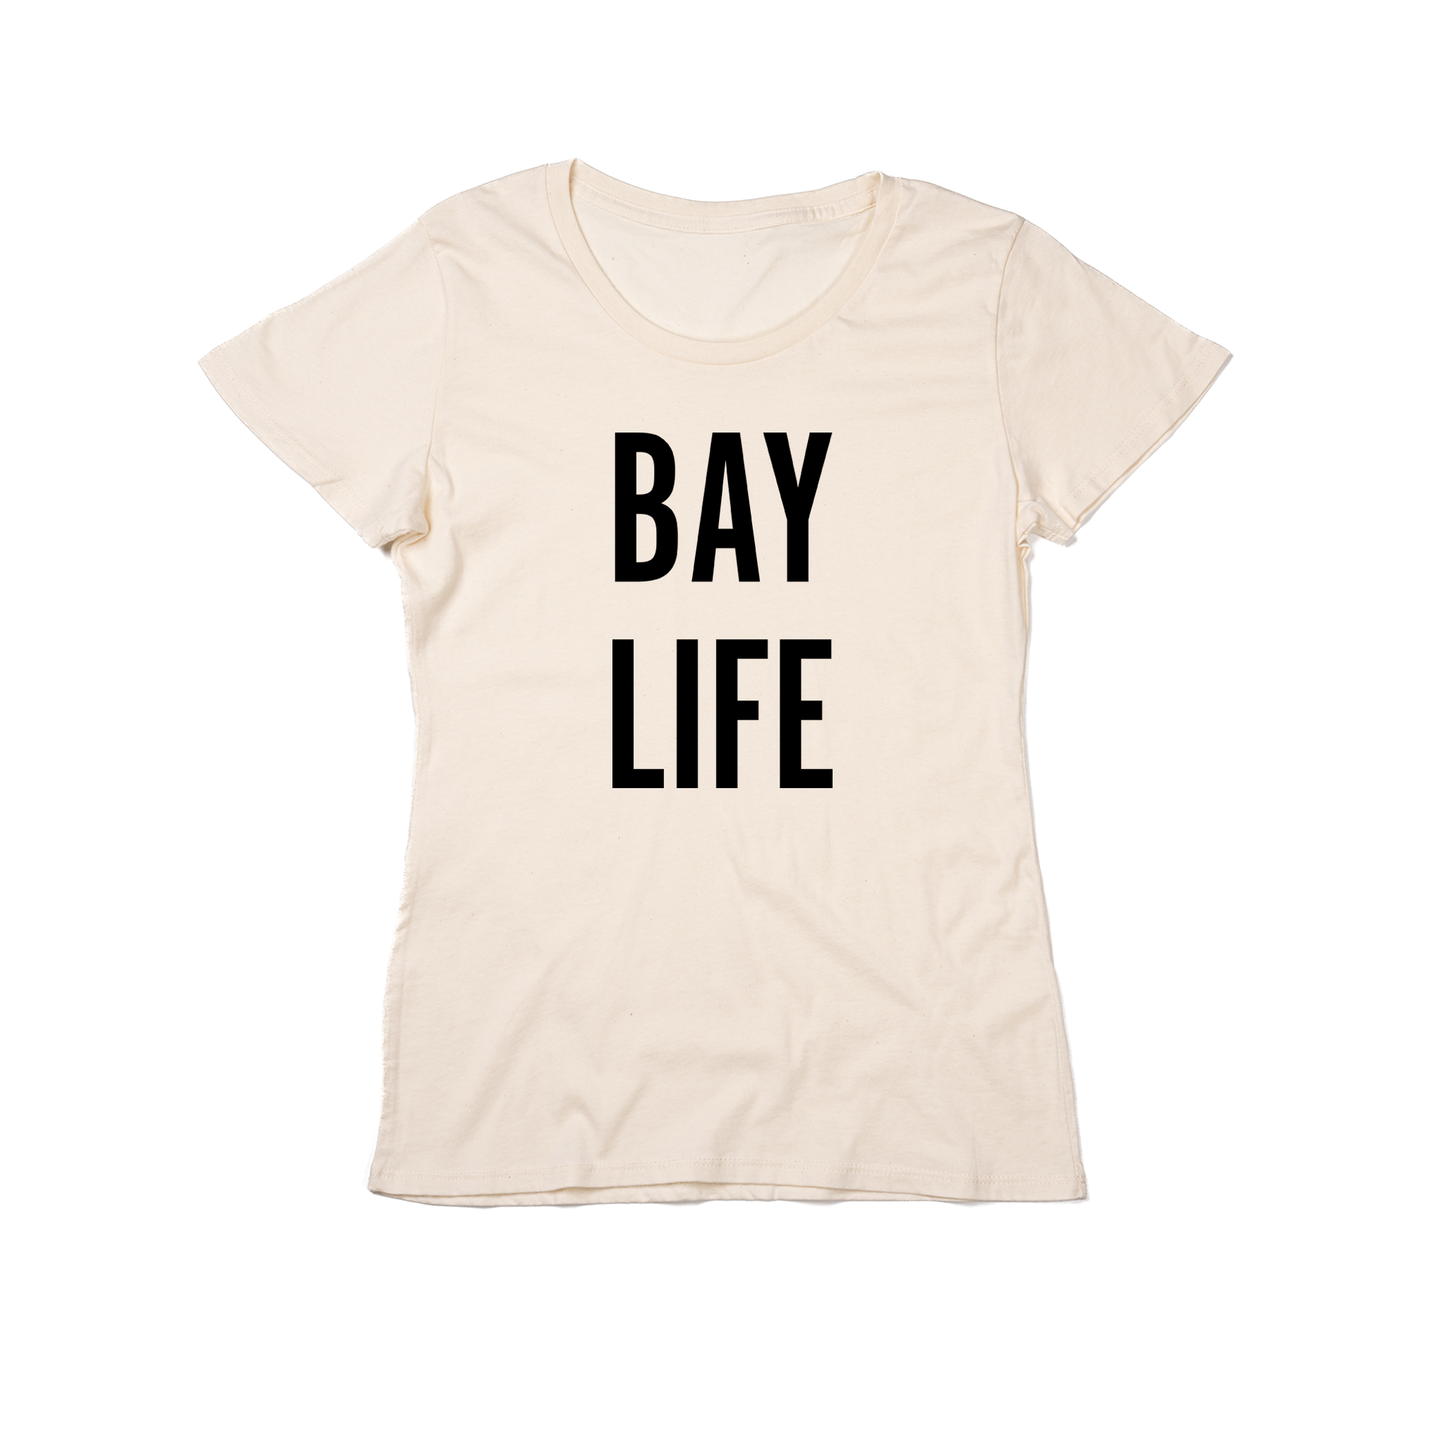 Bay Life (Black) - Women's Fitted Tee (Natural)